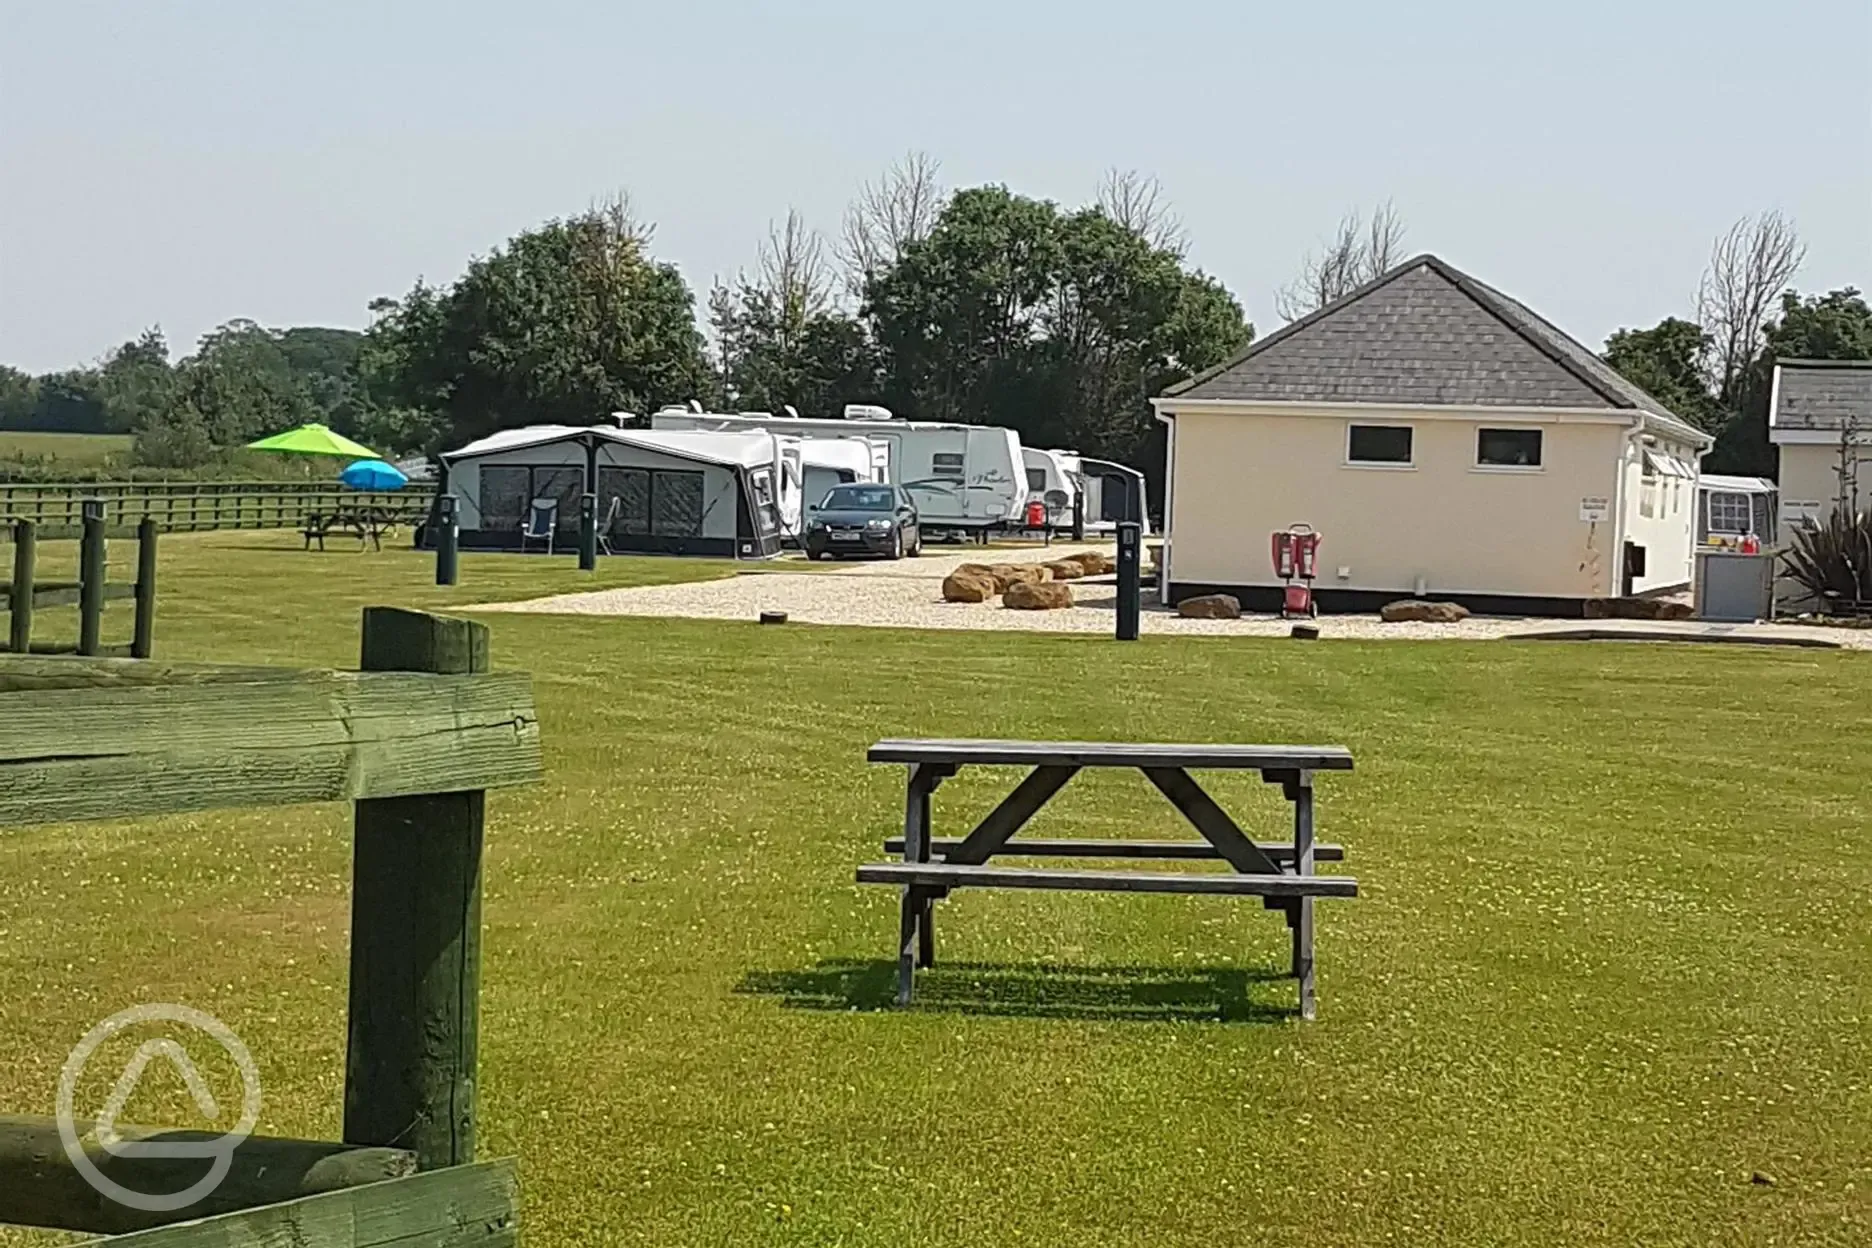 Camping all grass pitches